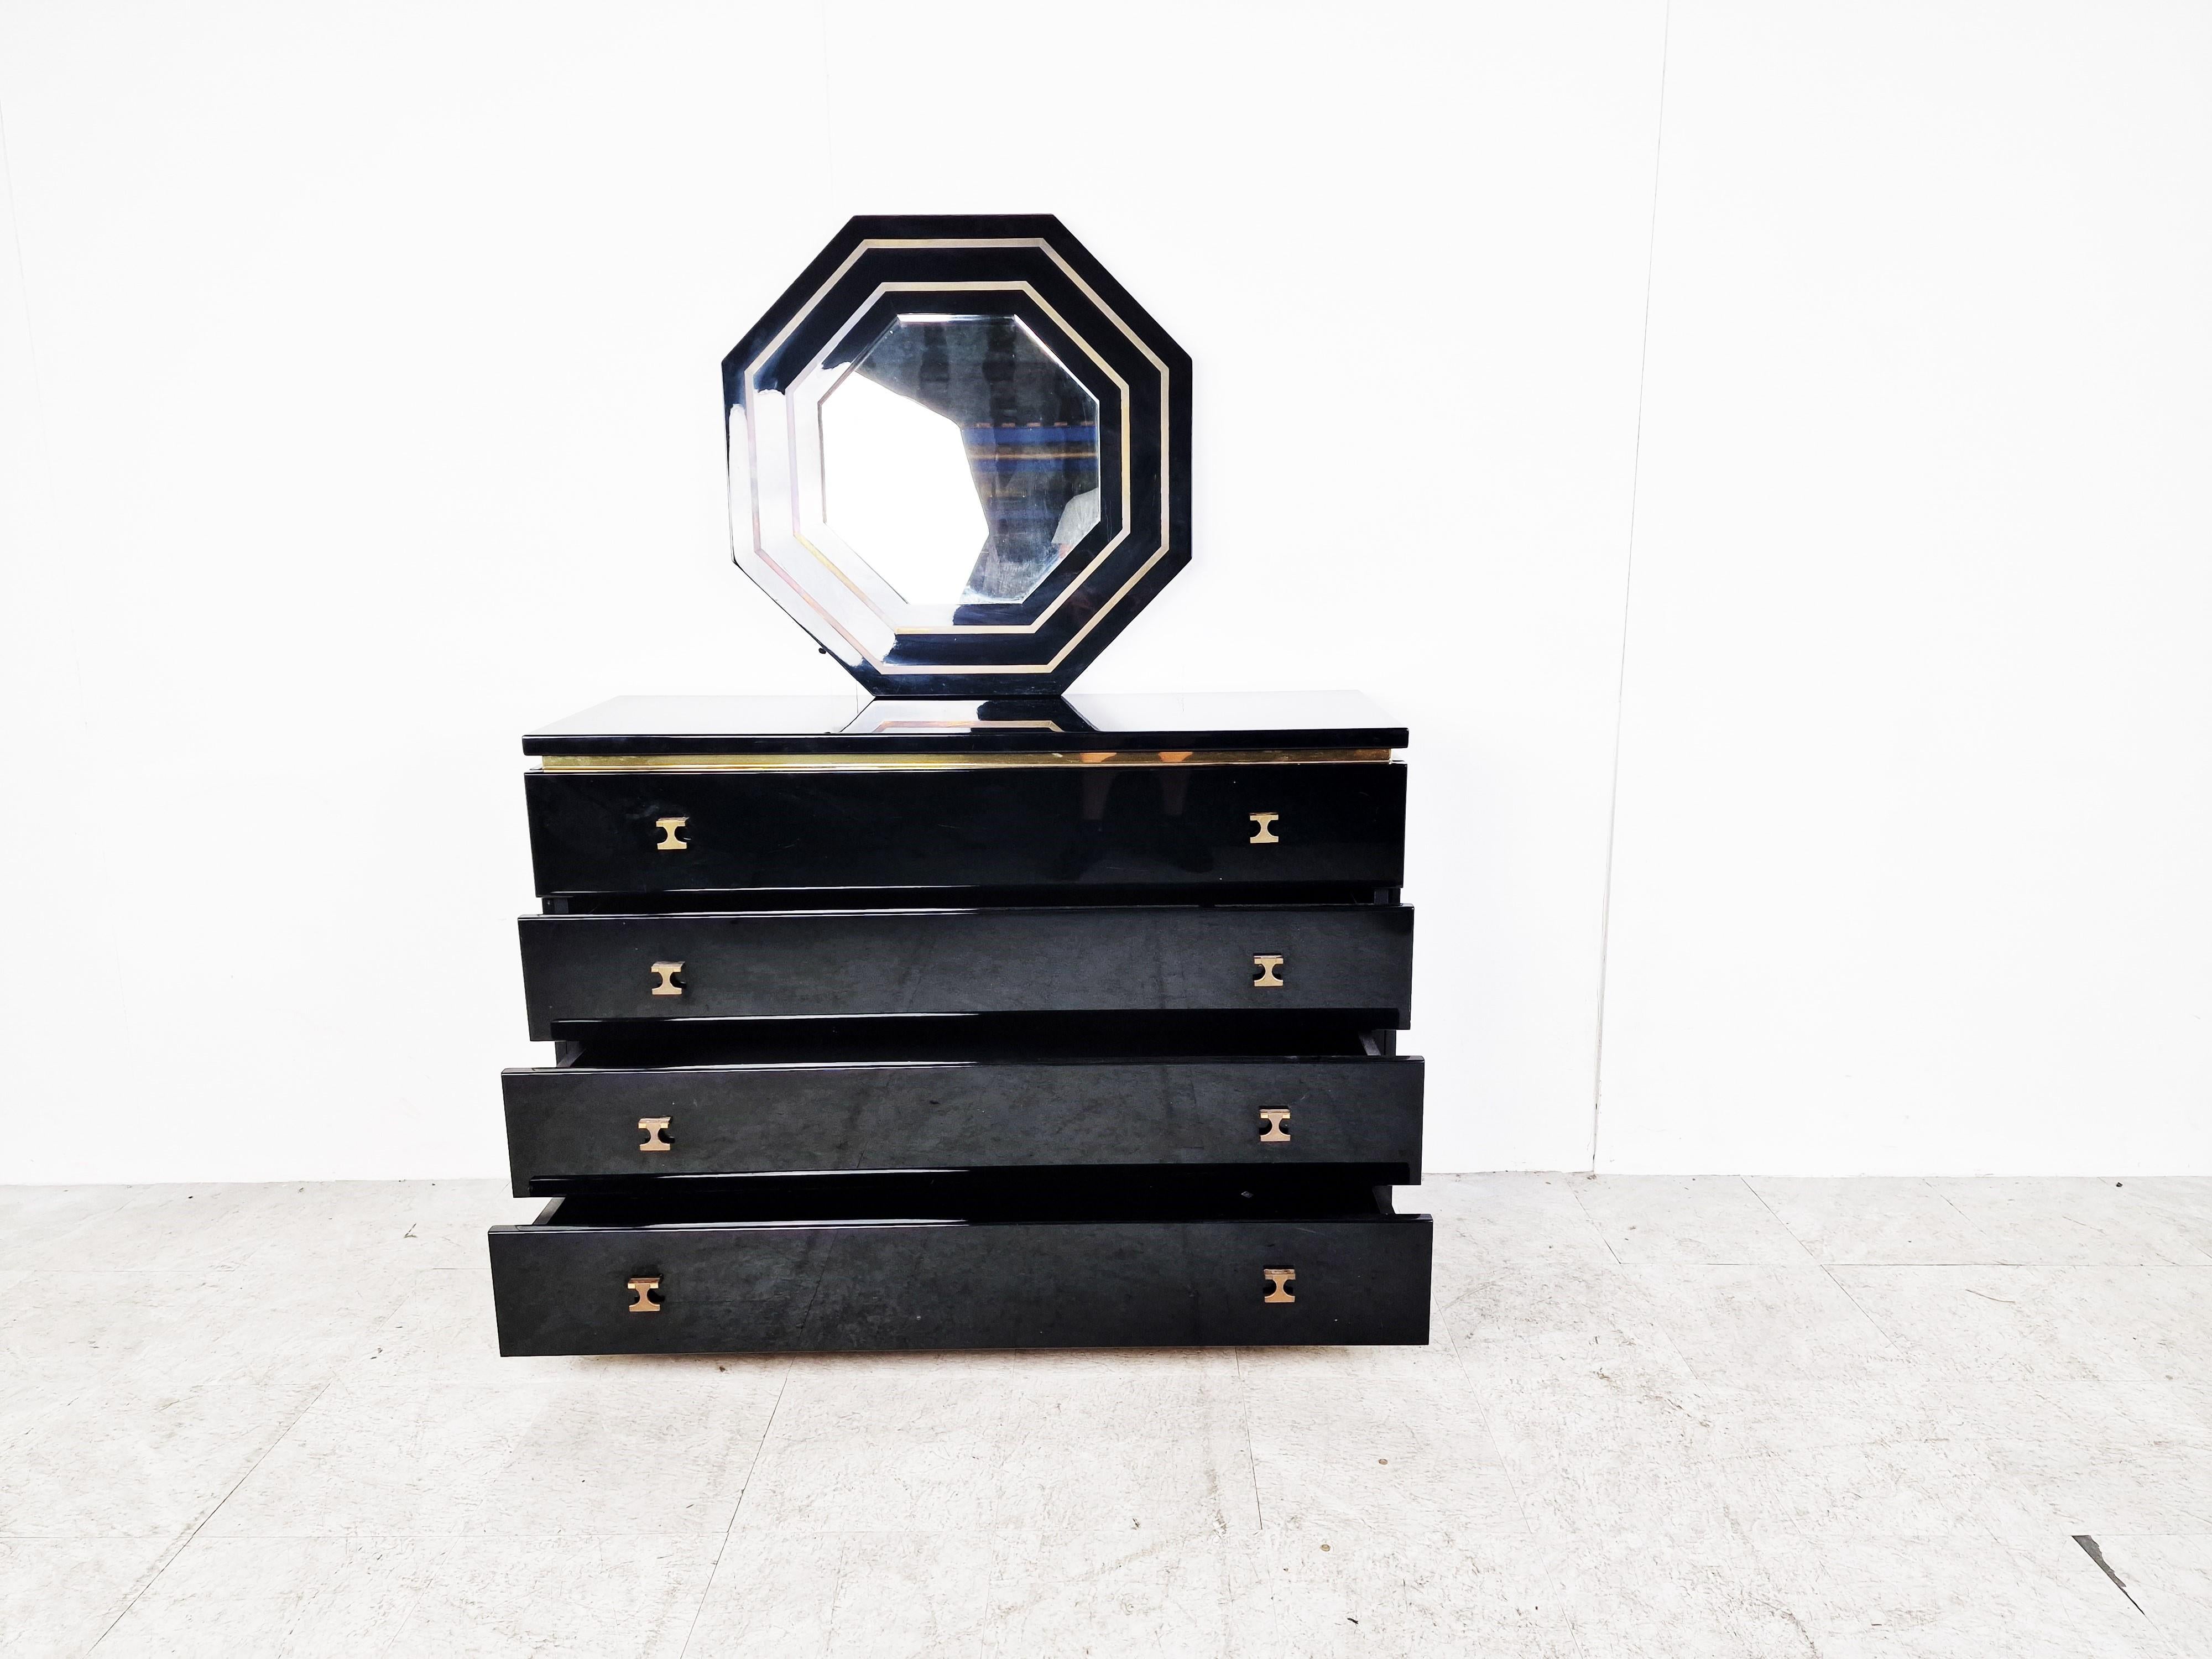 Beautiful black lacquer and brass chest of drawers by Jean Claude Mahey with matching octogonal mirror.

The chest of drawers is made of high quality materials and has a great 1970s - 1980s glamourous look.

It has 4 drawers.

Good